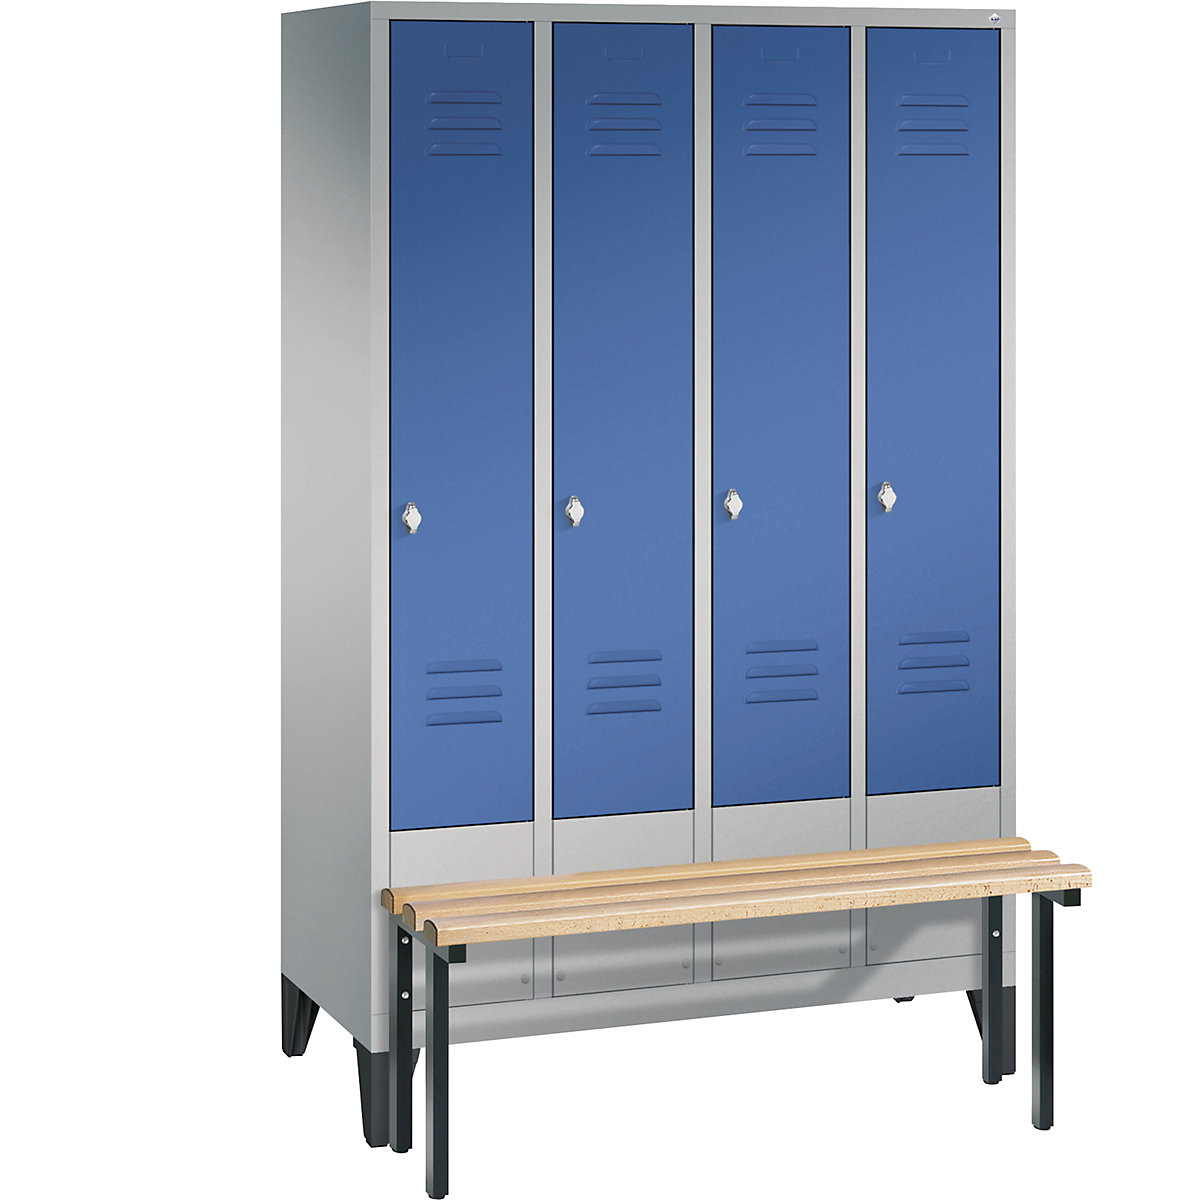 CLASSIC cloakroom locker with bench mounted in front – C+P, 4 compartments, compartment width 300 mm, white aluminium / gentian blue-6